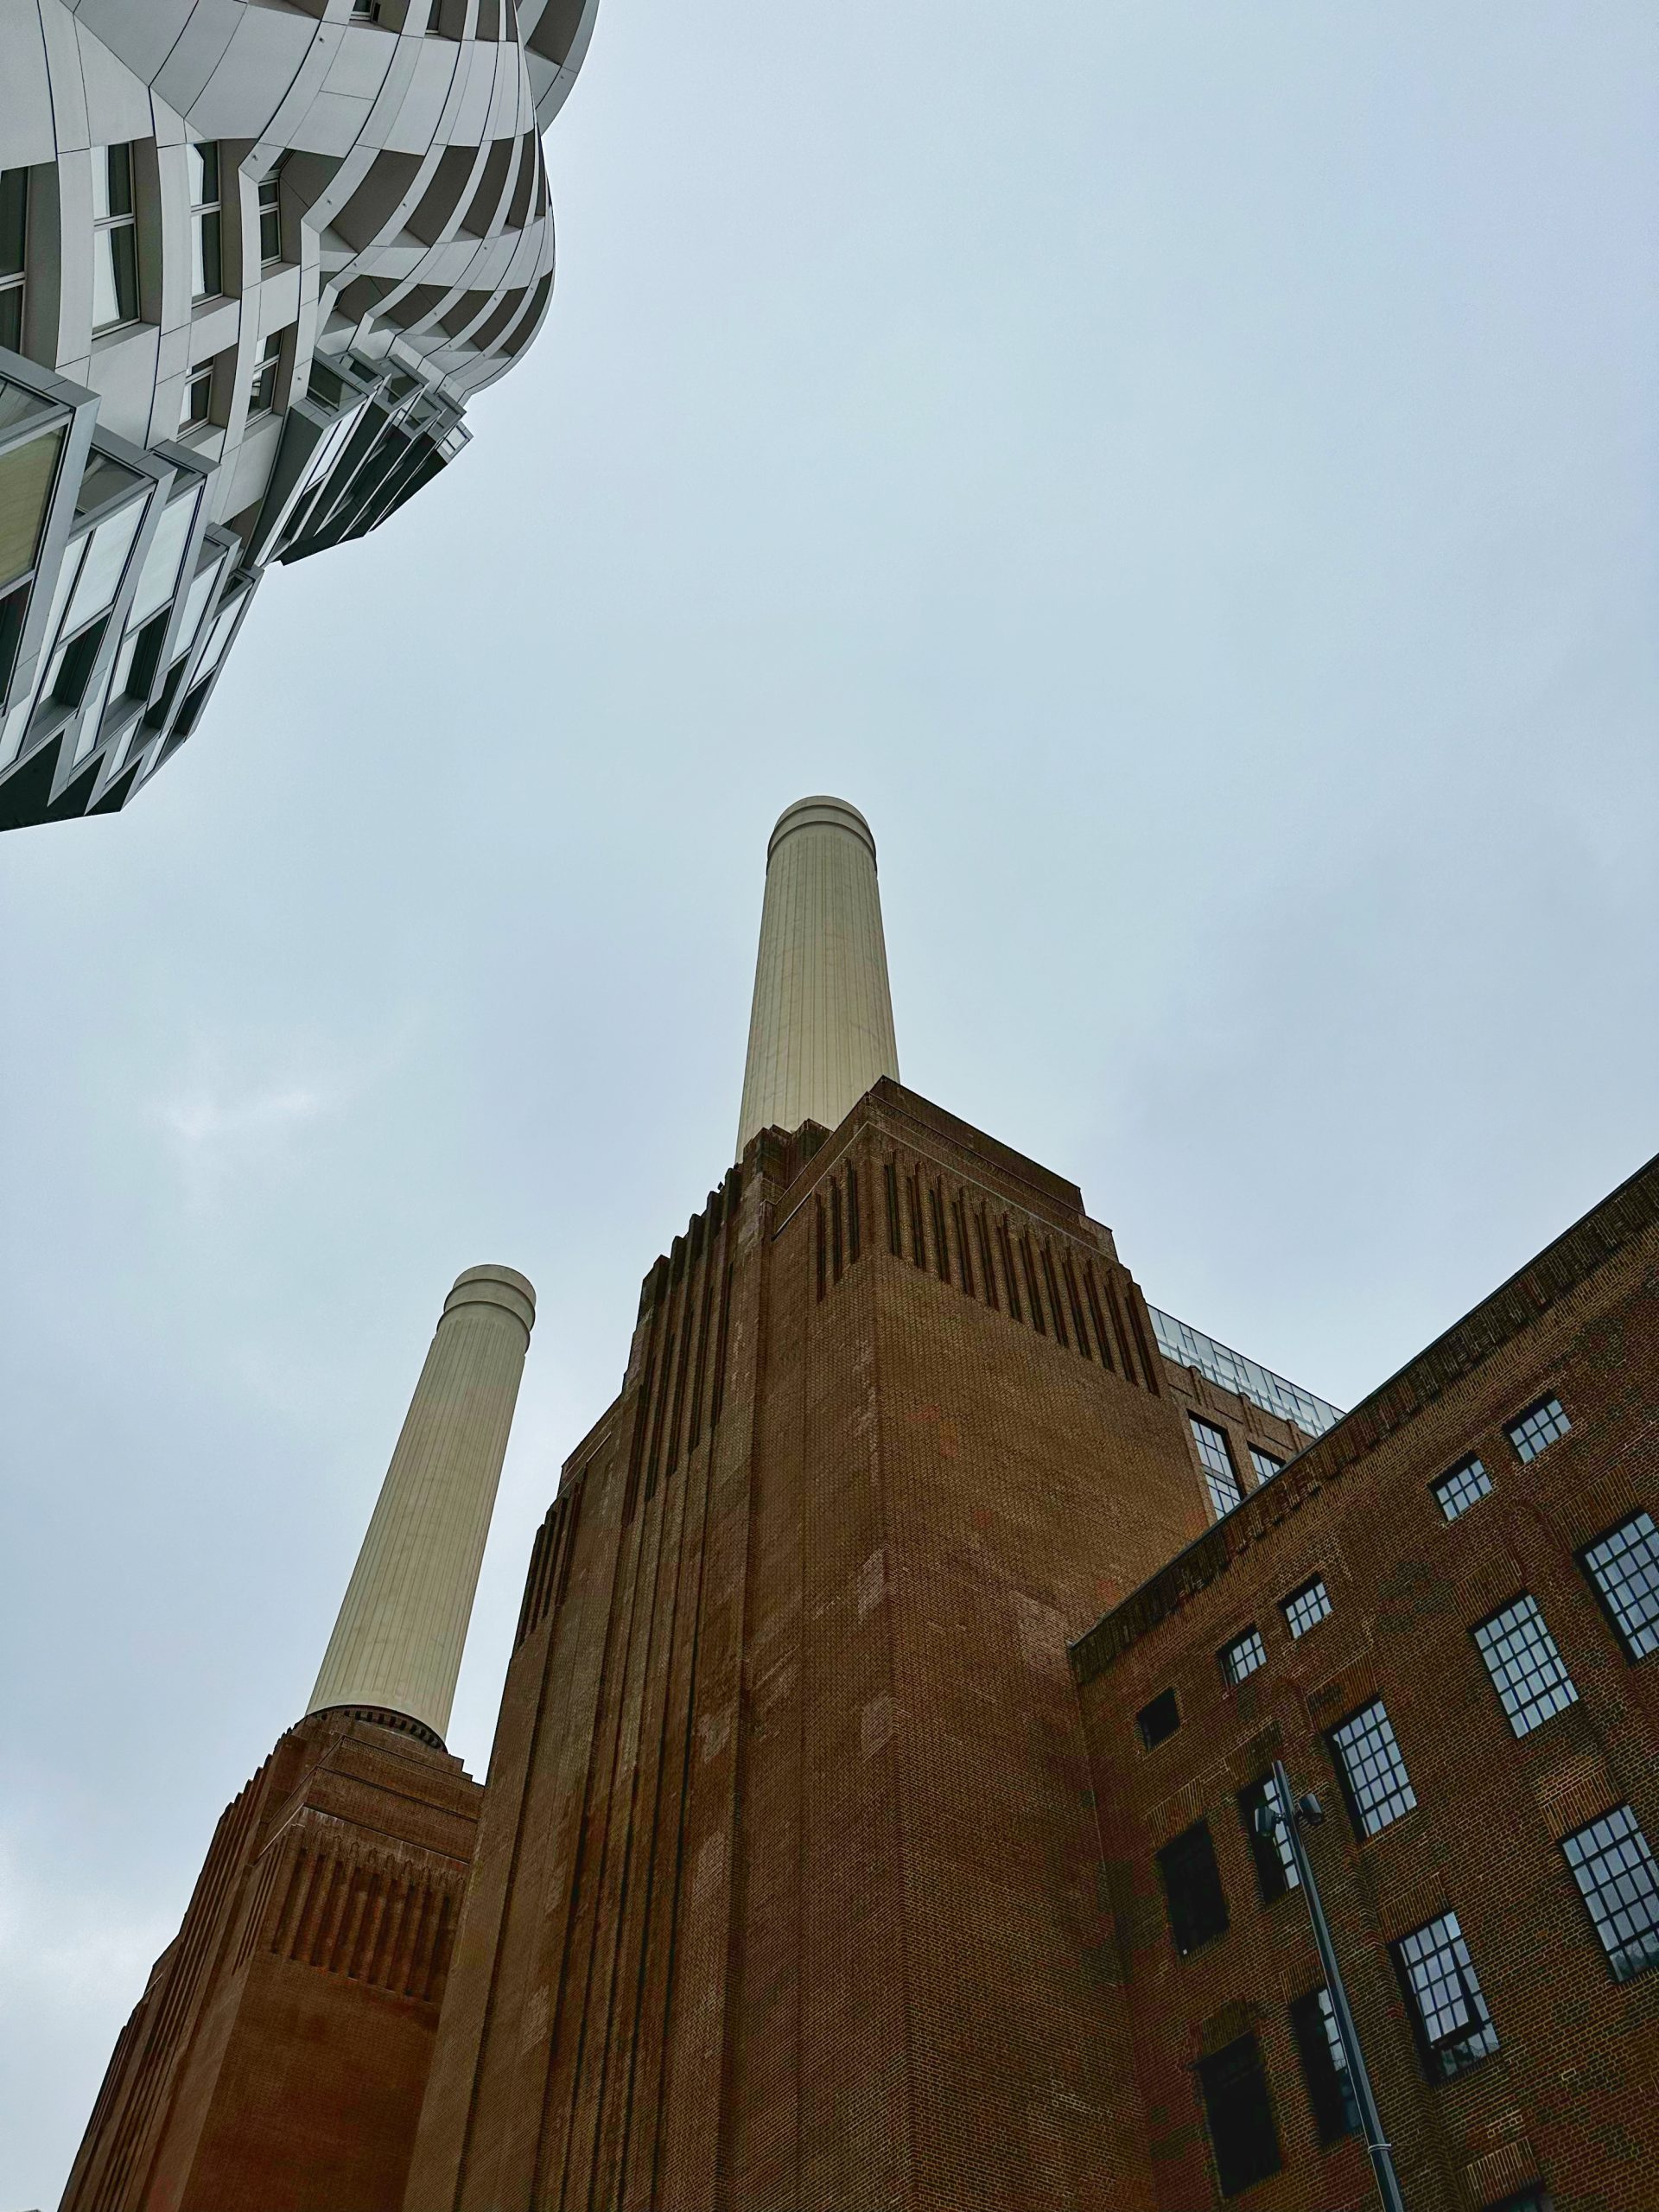 The approach to Battersea Power Station